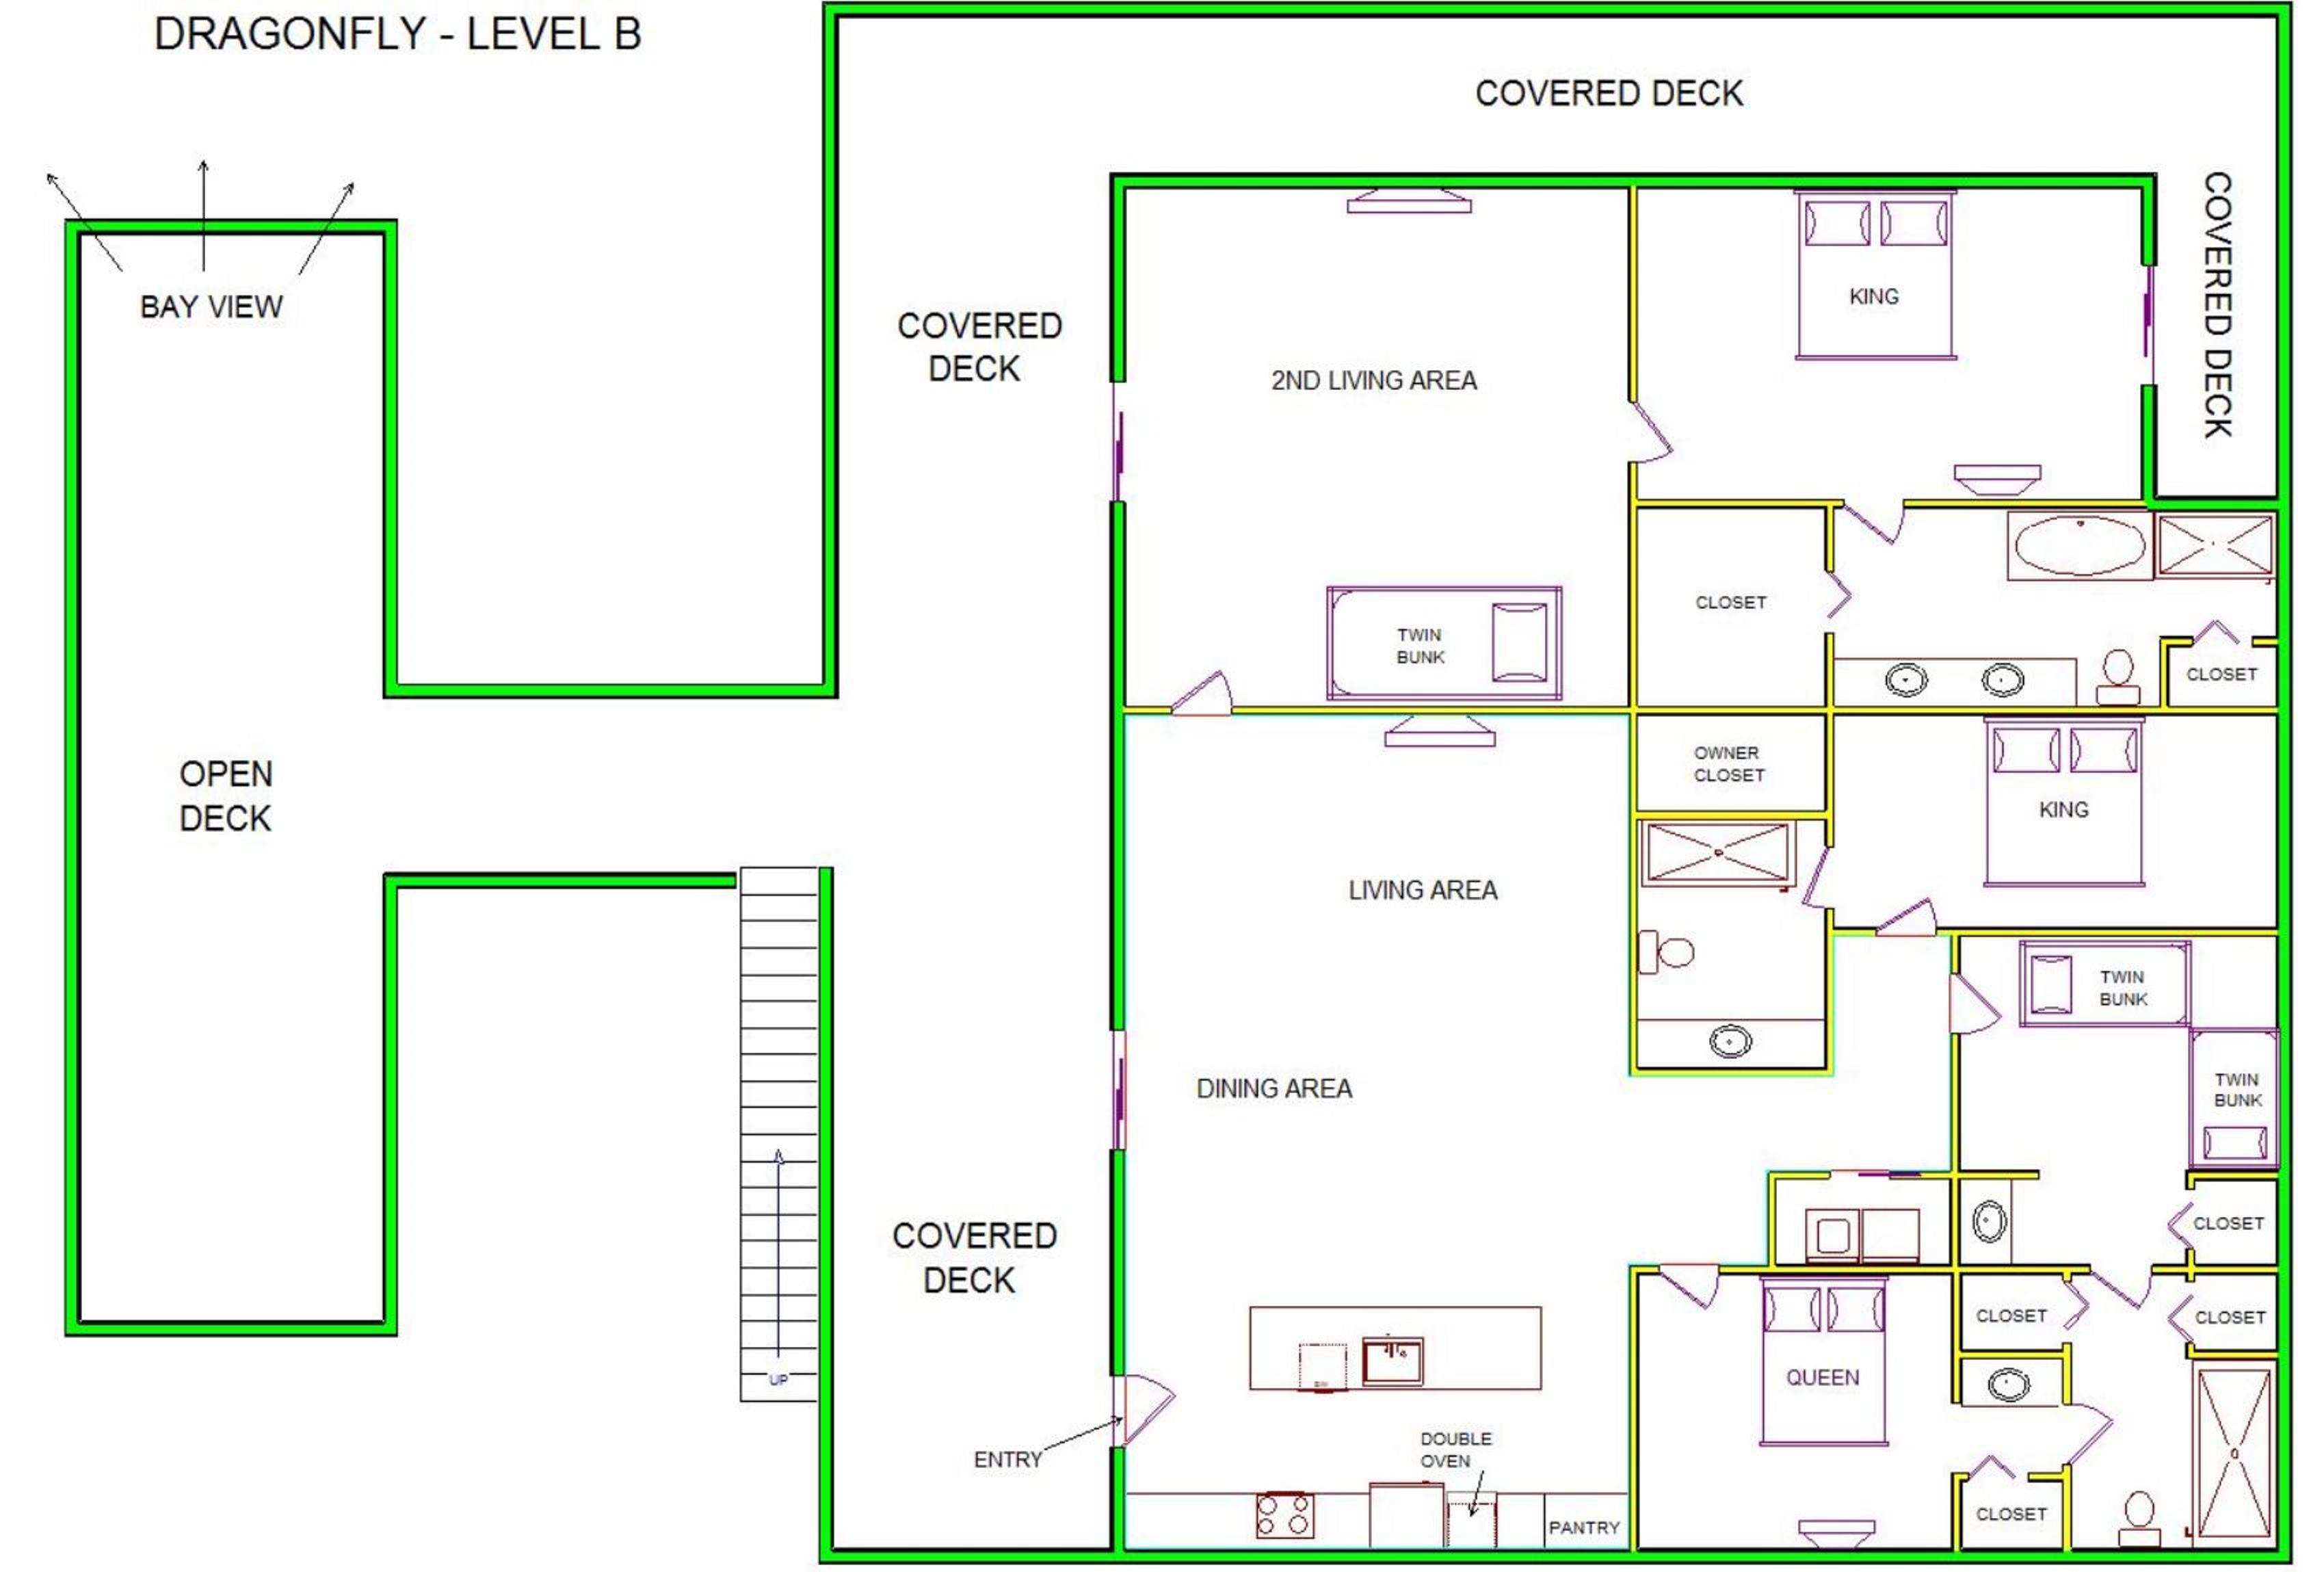 A level B layout view of Sand 'N Sea's canal house vacation rental in Galveston named Dragonfly 